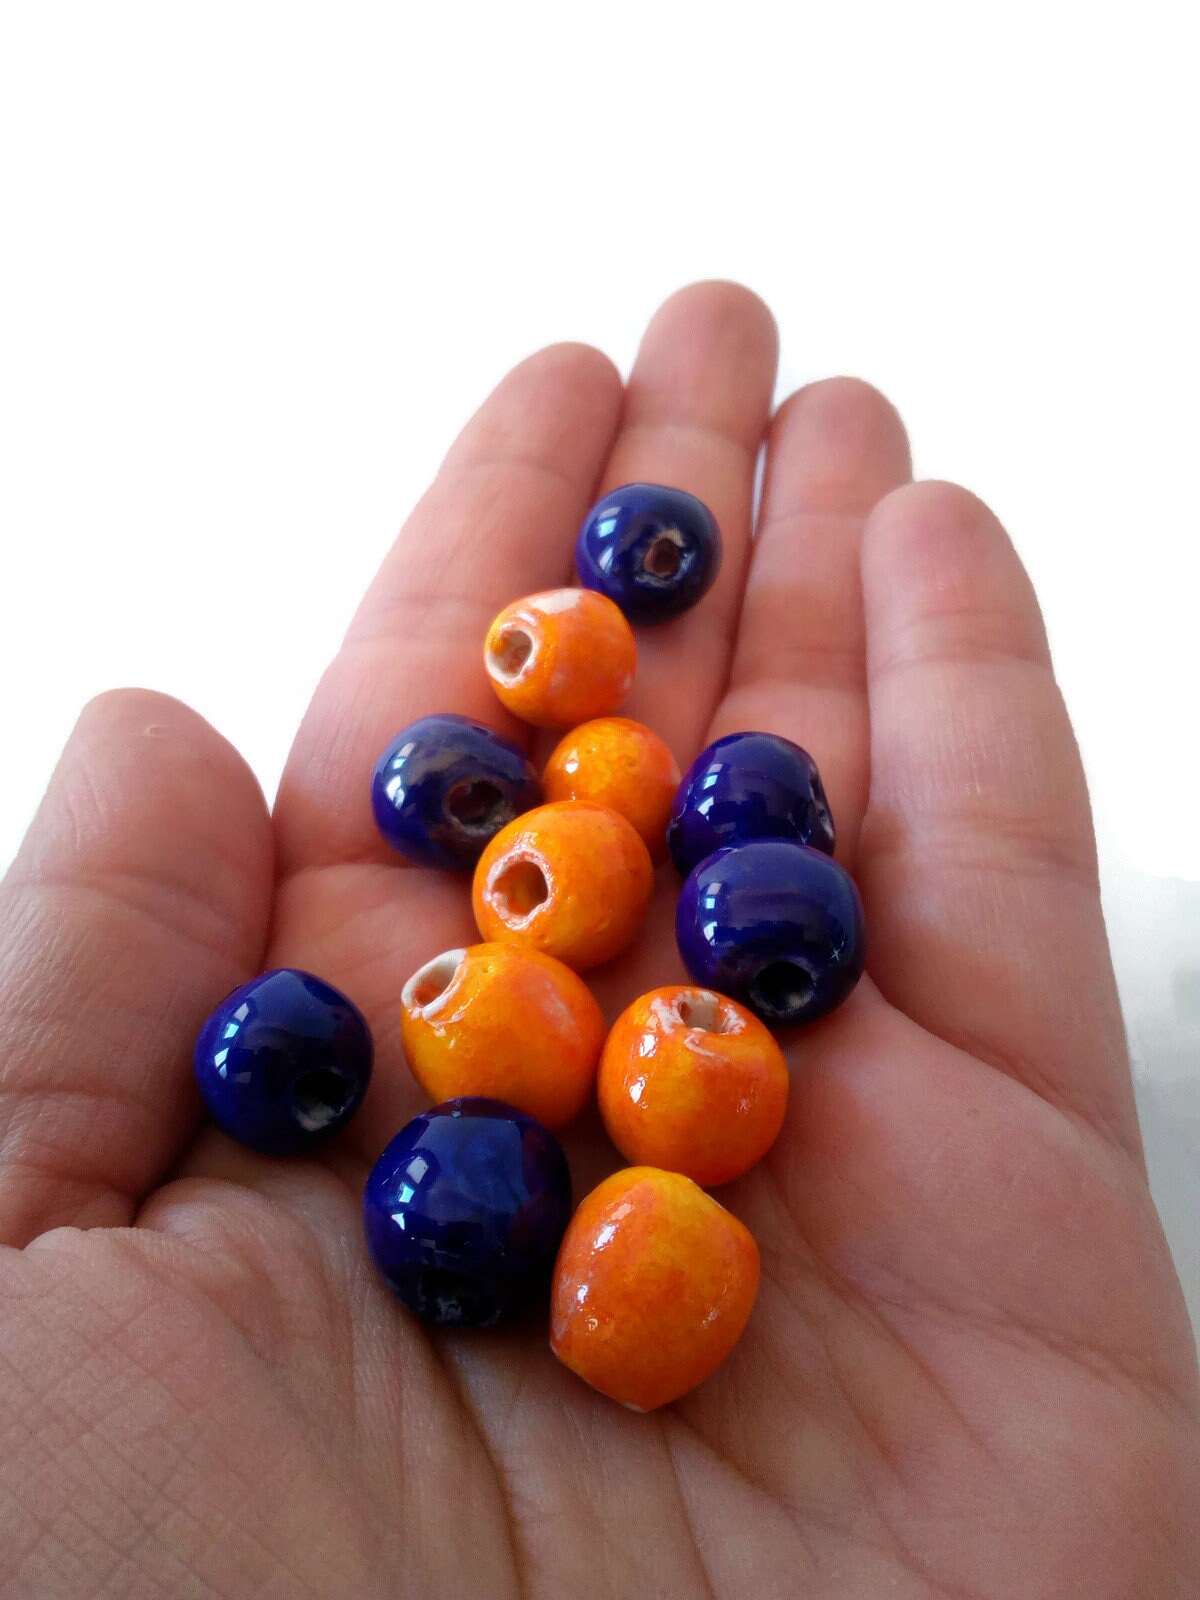 12 Pcs Handmade Ceramic Beads 10mm, Assorted Clay Beads Round Shaped, Unique Beads For Jewelry Making, Decorative Porcelain Macrame Beads